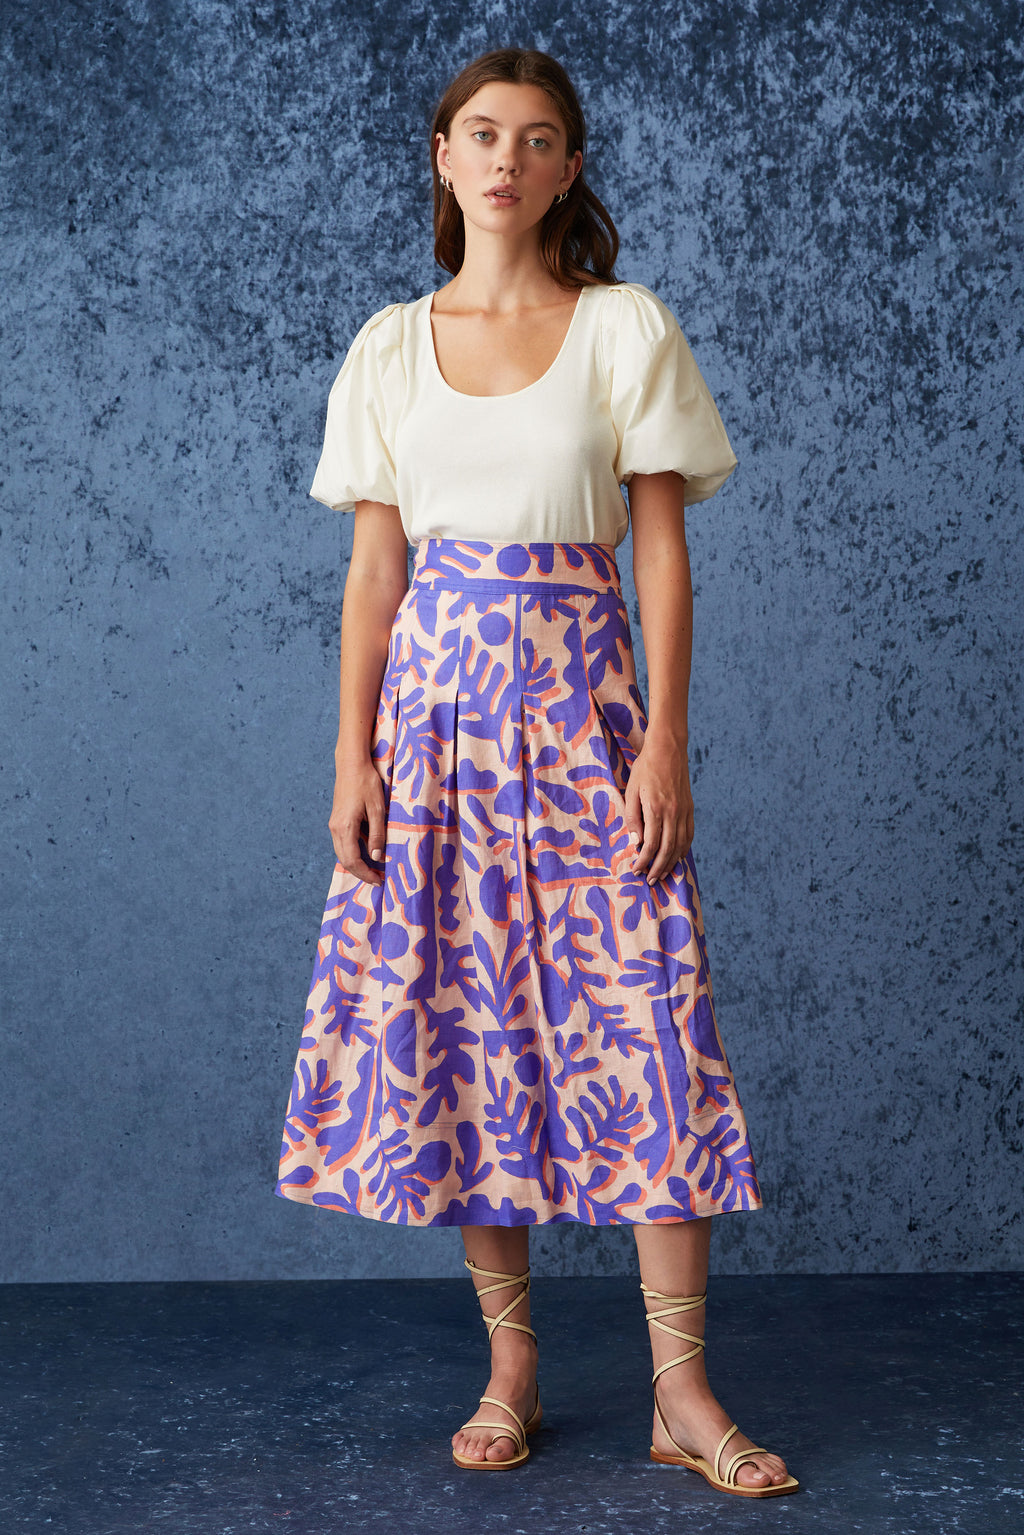 Geometric printed maxi skirt that sits at the high waistline with a side zip closure in a pink and purple color